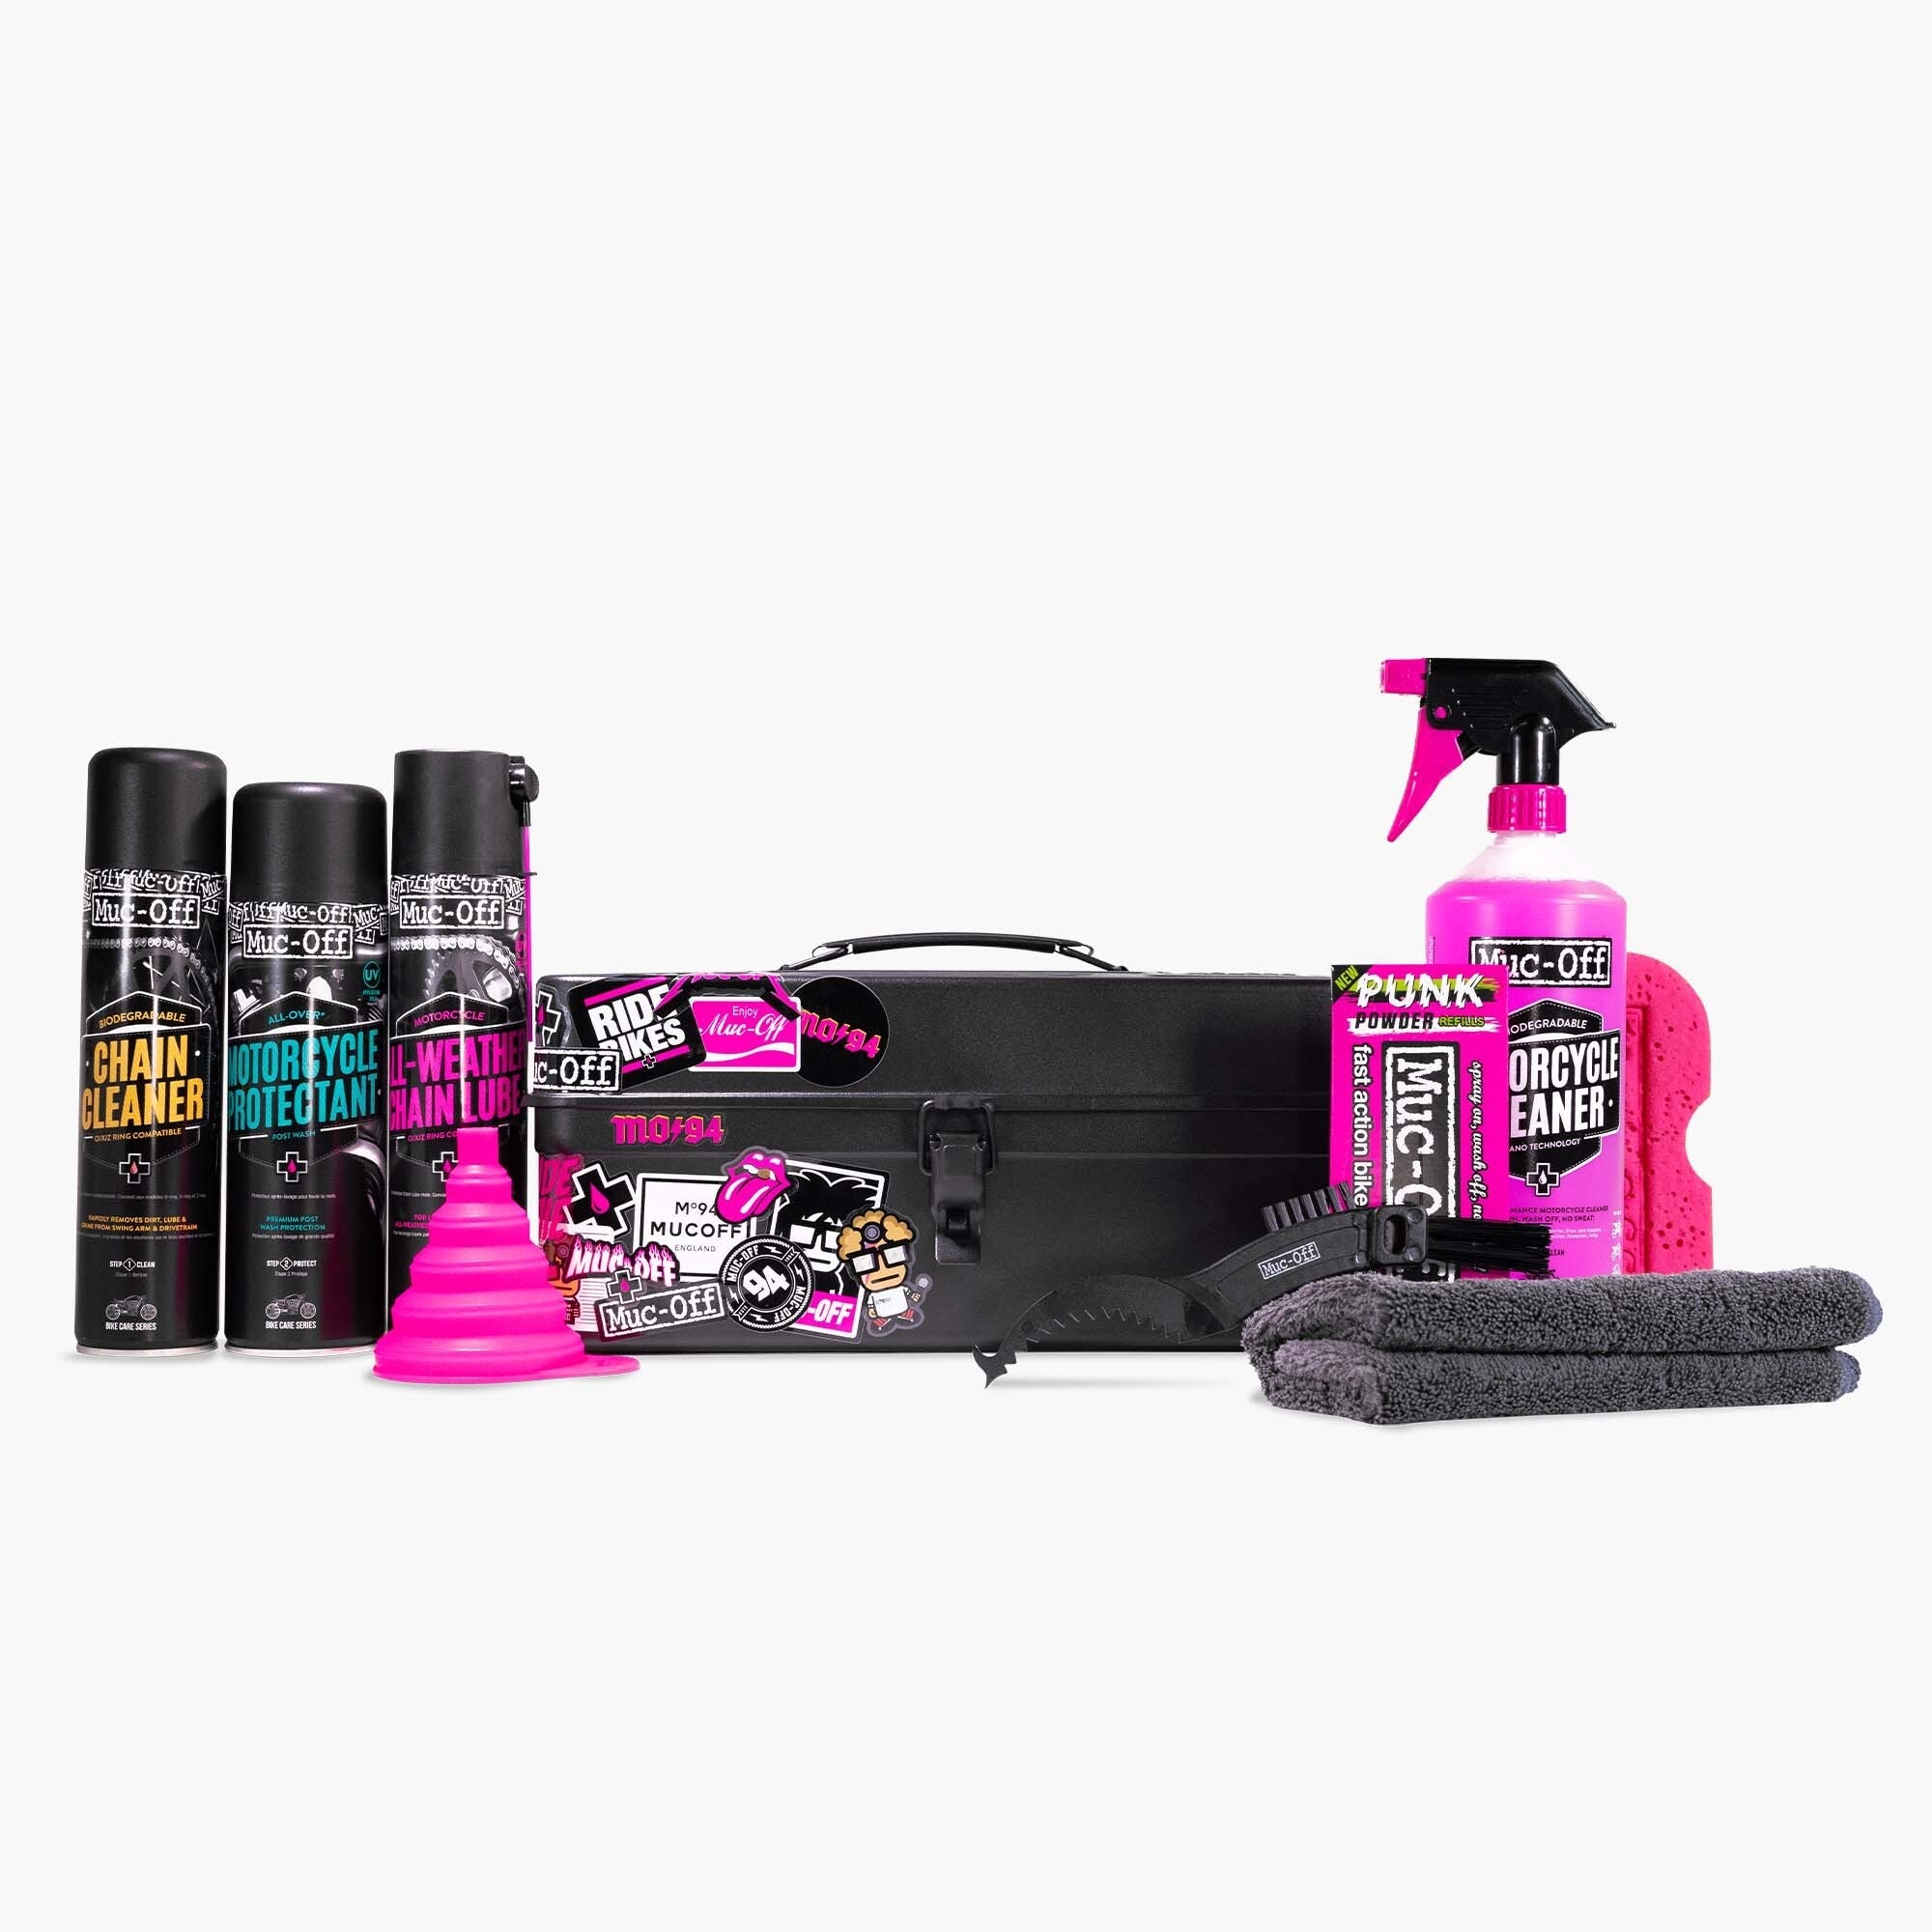 Motorcycle Ultimate Cleaning Kit for Motorcycle Muc-Off